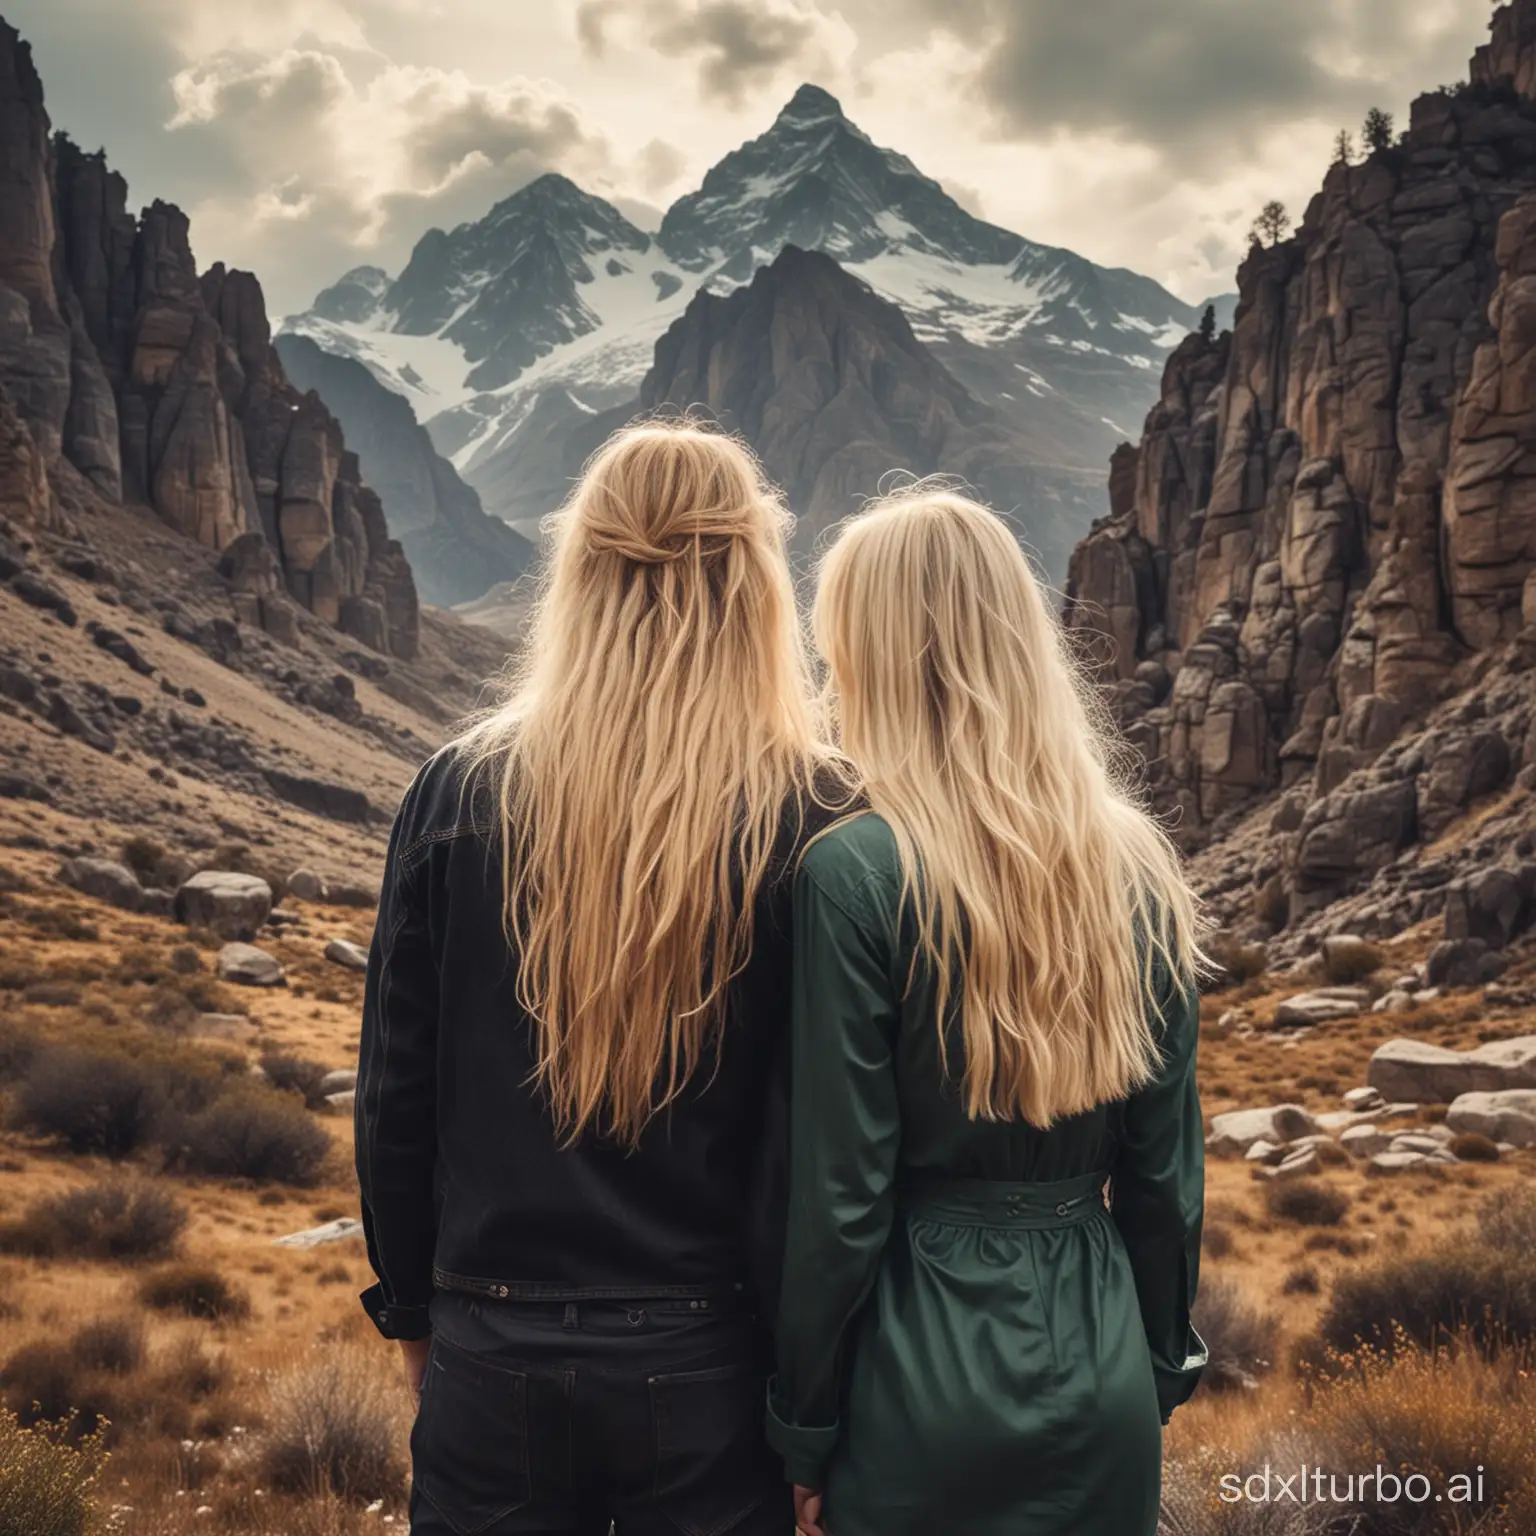 stoner rock band composed of a long haired man and a blonde woman, from behind, in the mountains